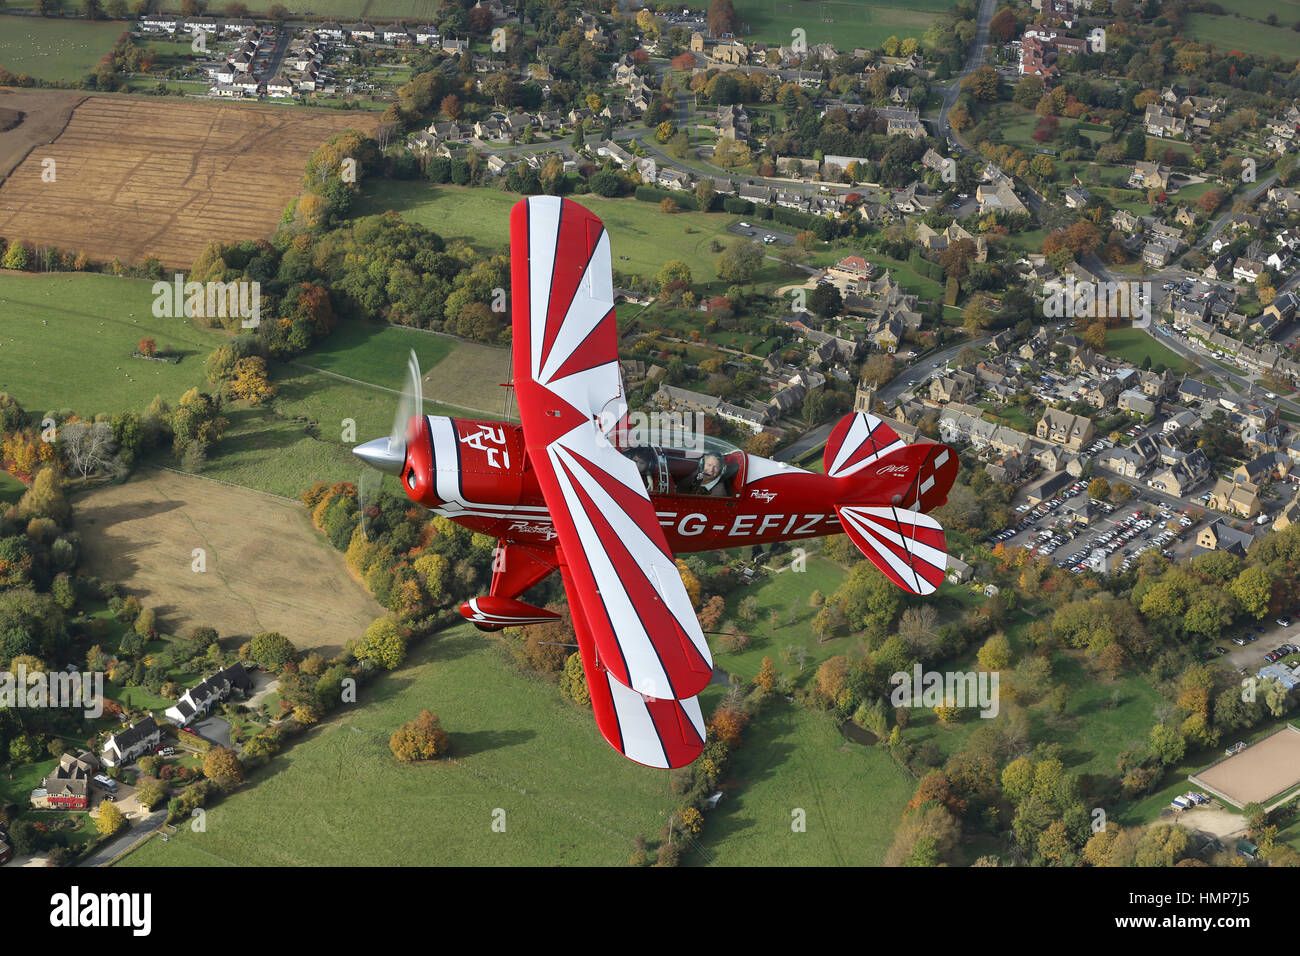 The Rich Goodwin Pitts Special being flown over the Worcestershire countryside Stock Photo